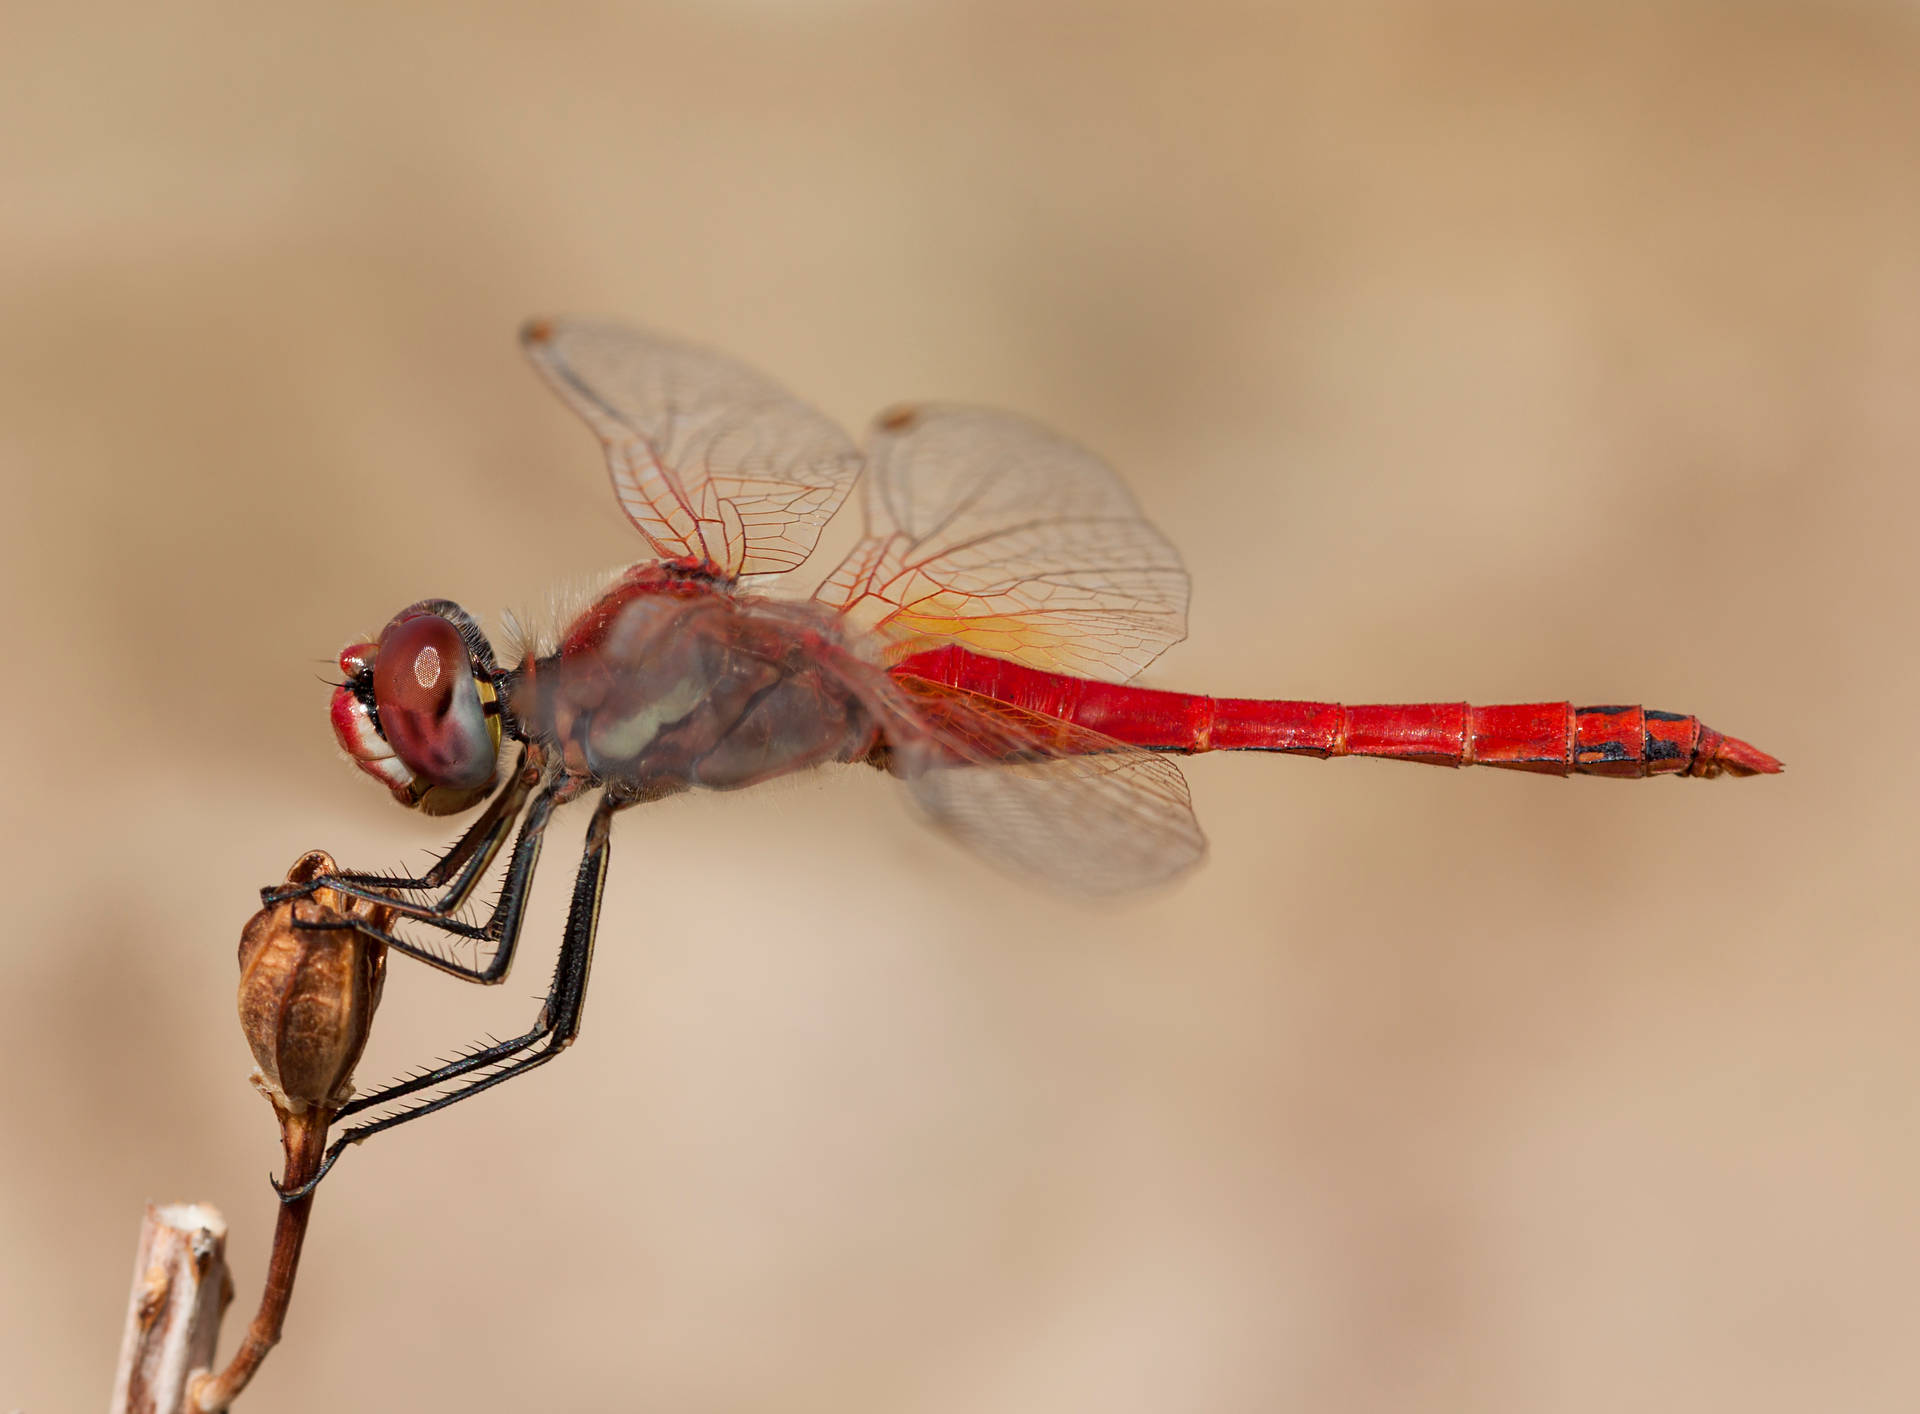 Insect Dragonfly With Red Body